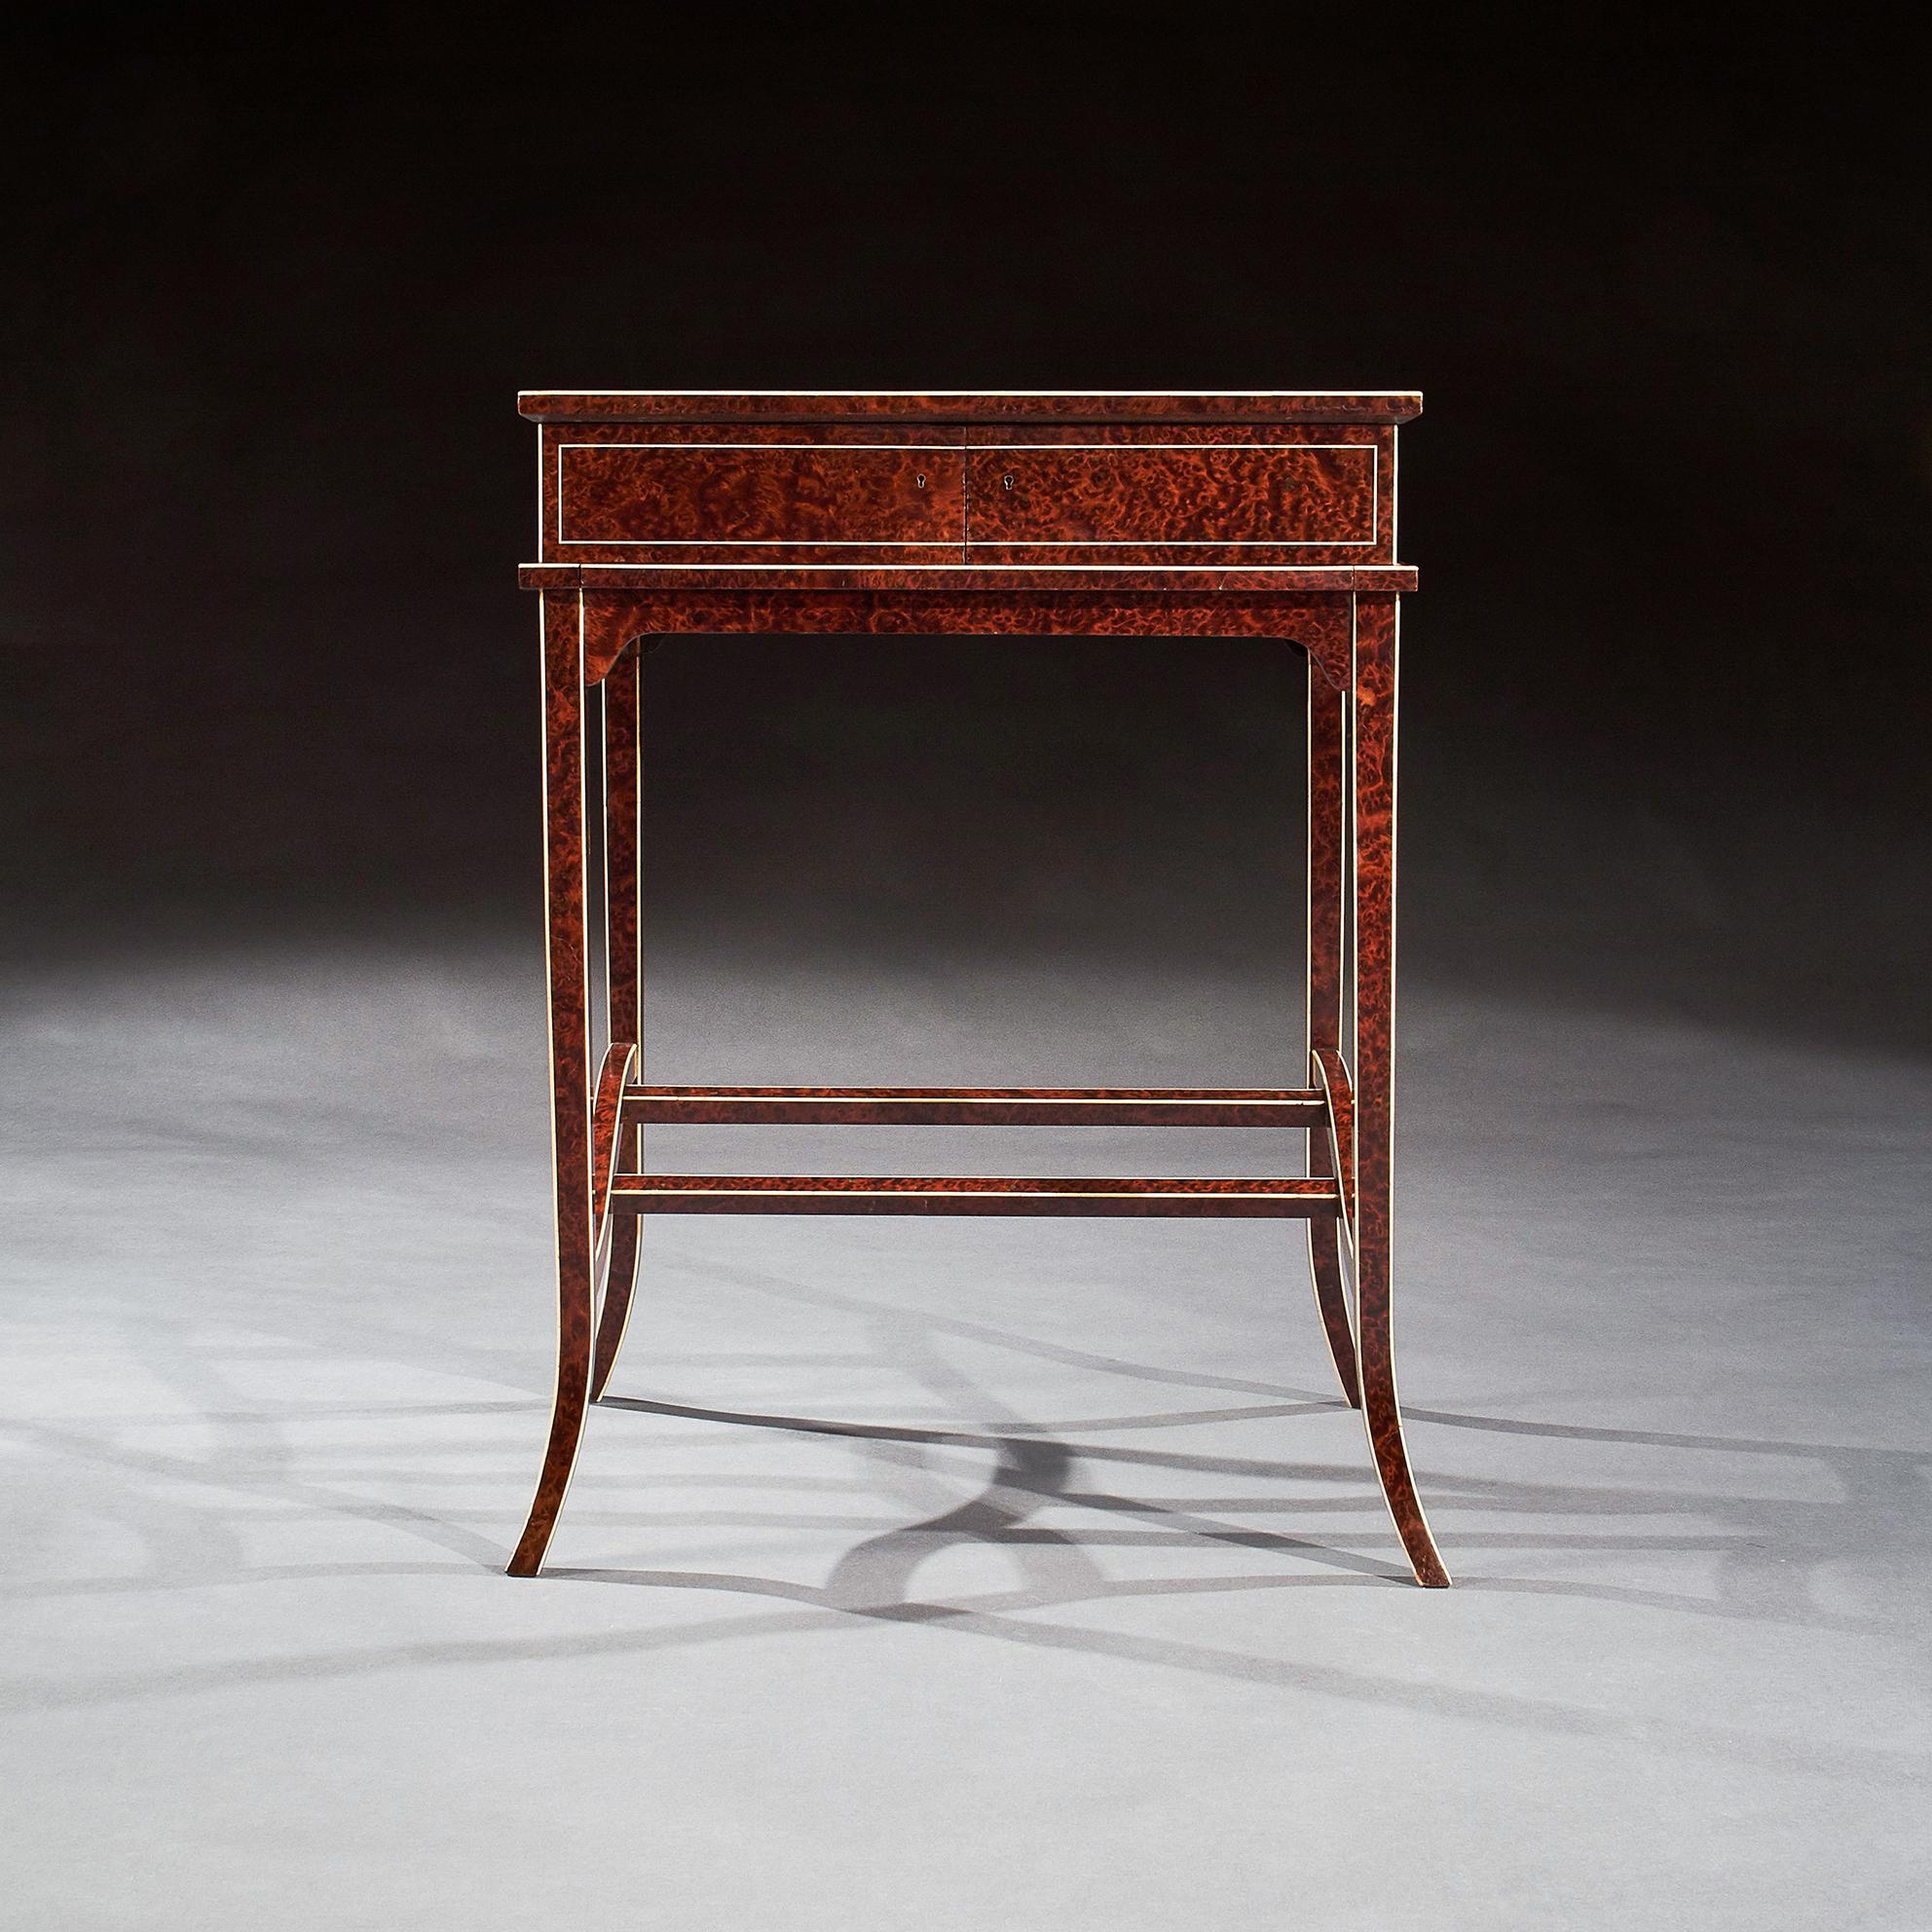 A very elegant and stylish thuya wood metamorphic writing table with ivory stringing and tulipwood crossbanding. 

French, circa 1910-20.

Inspired by the late 18th Century neoclassical designs (particularly those of Thomas Sheraton) this extremely